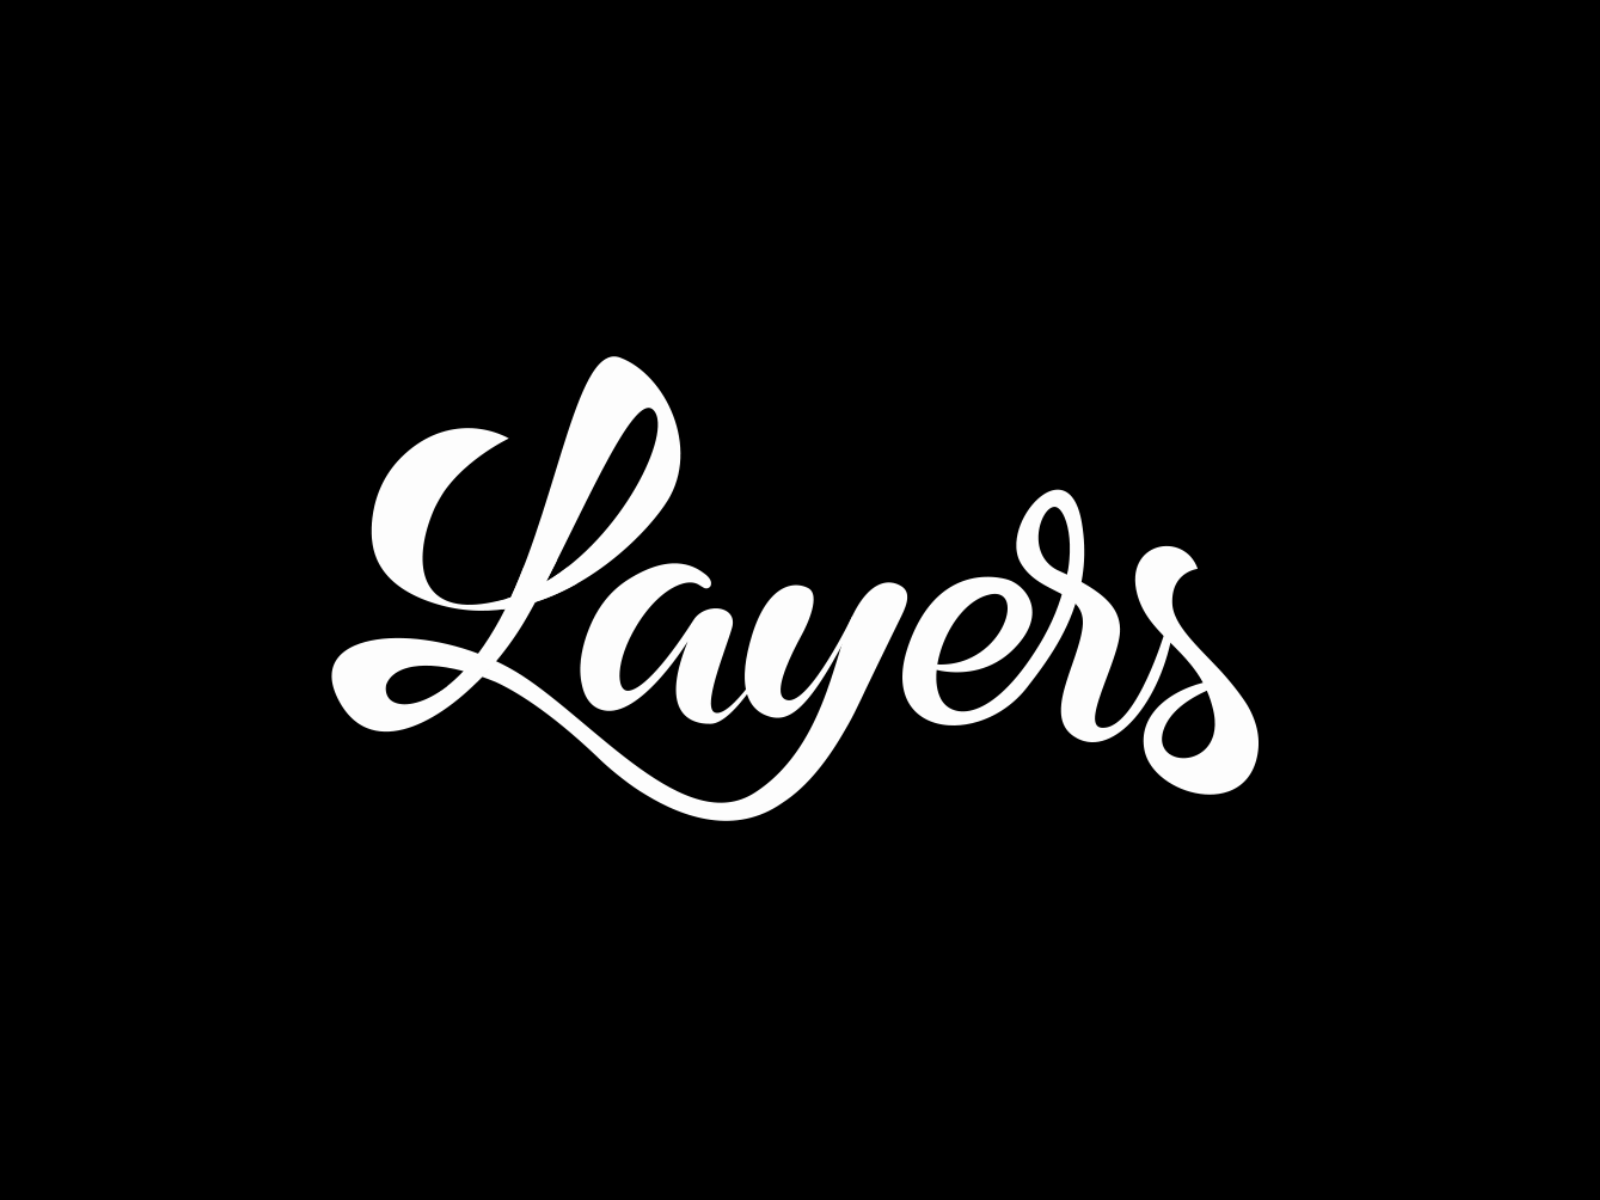 Layers — Lettering Animation